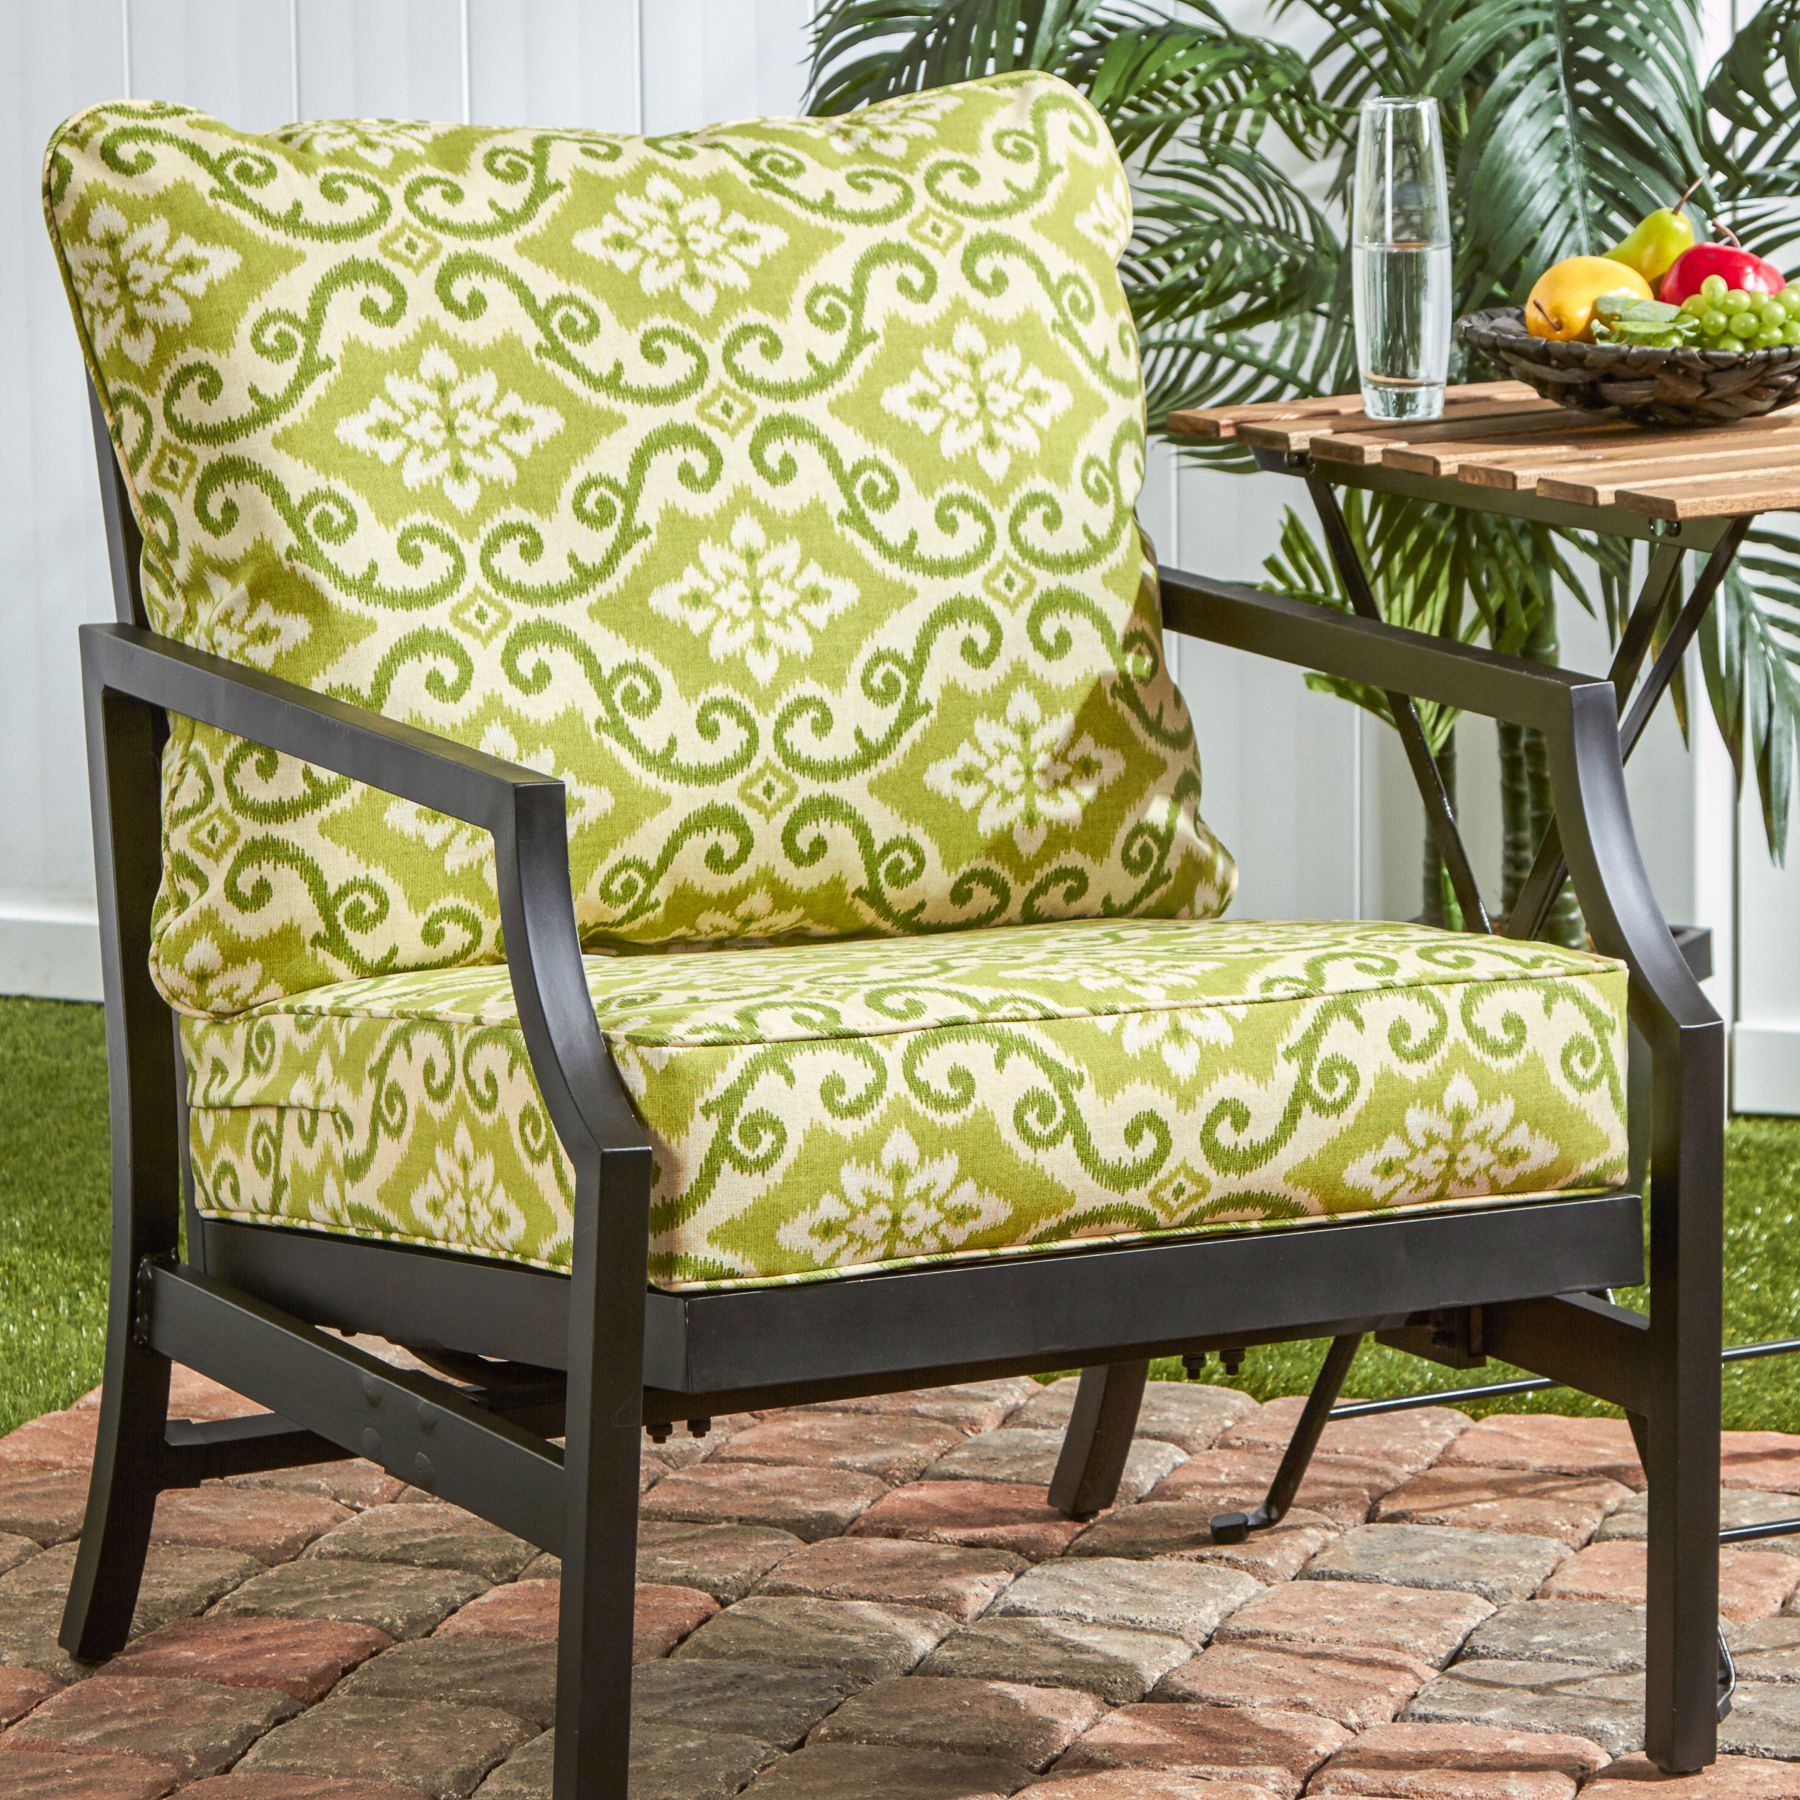 Trendy Green Outdoor Seating Patio Sets In Outdoor Sunbrella Deep Seat Chair Cushion Set Green Ikat Patio Garden (View 2 of 15)